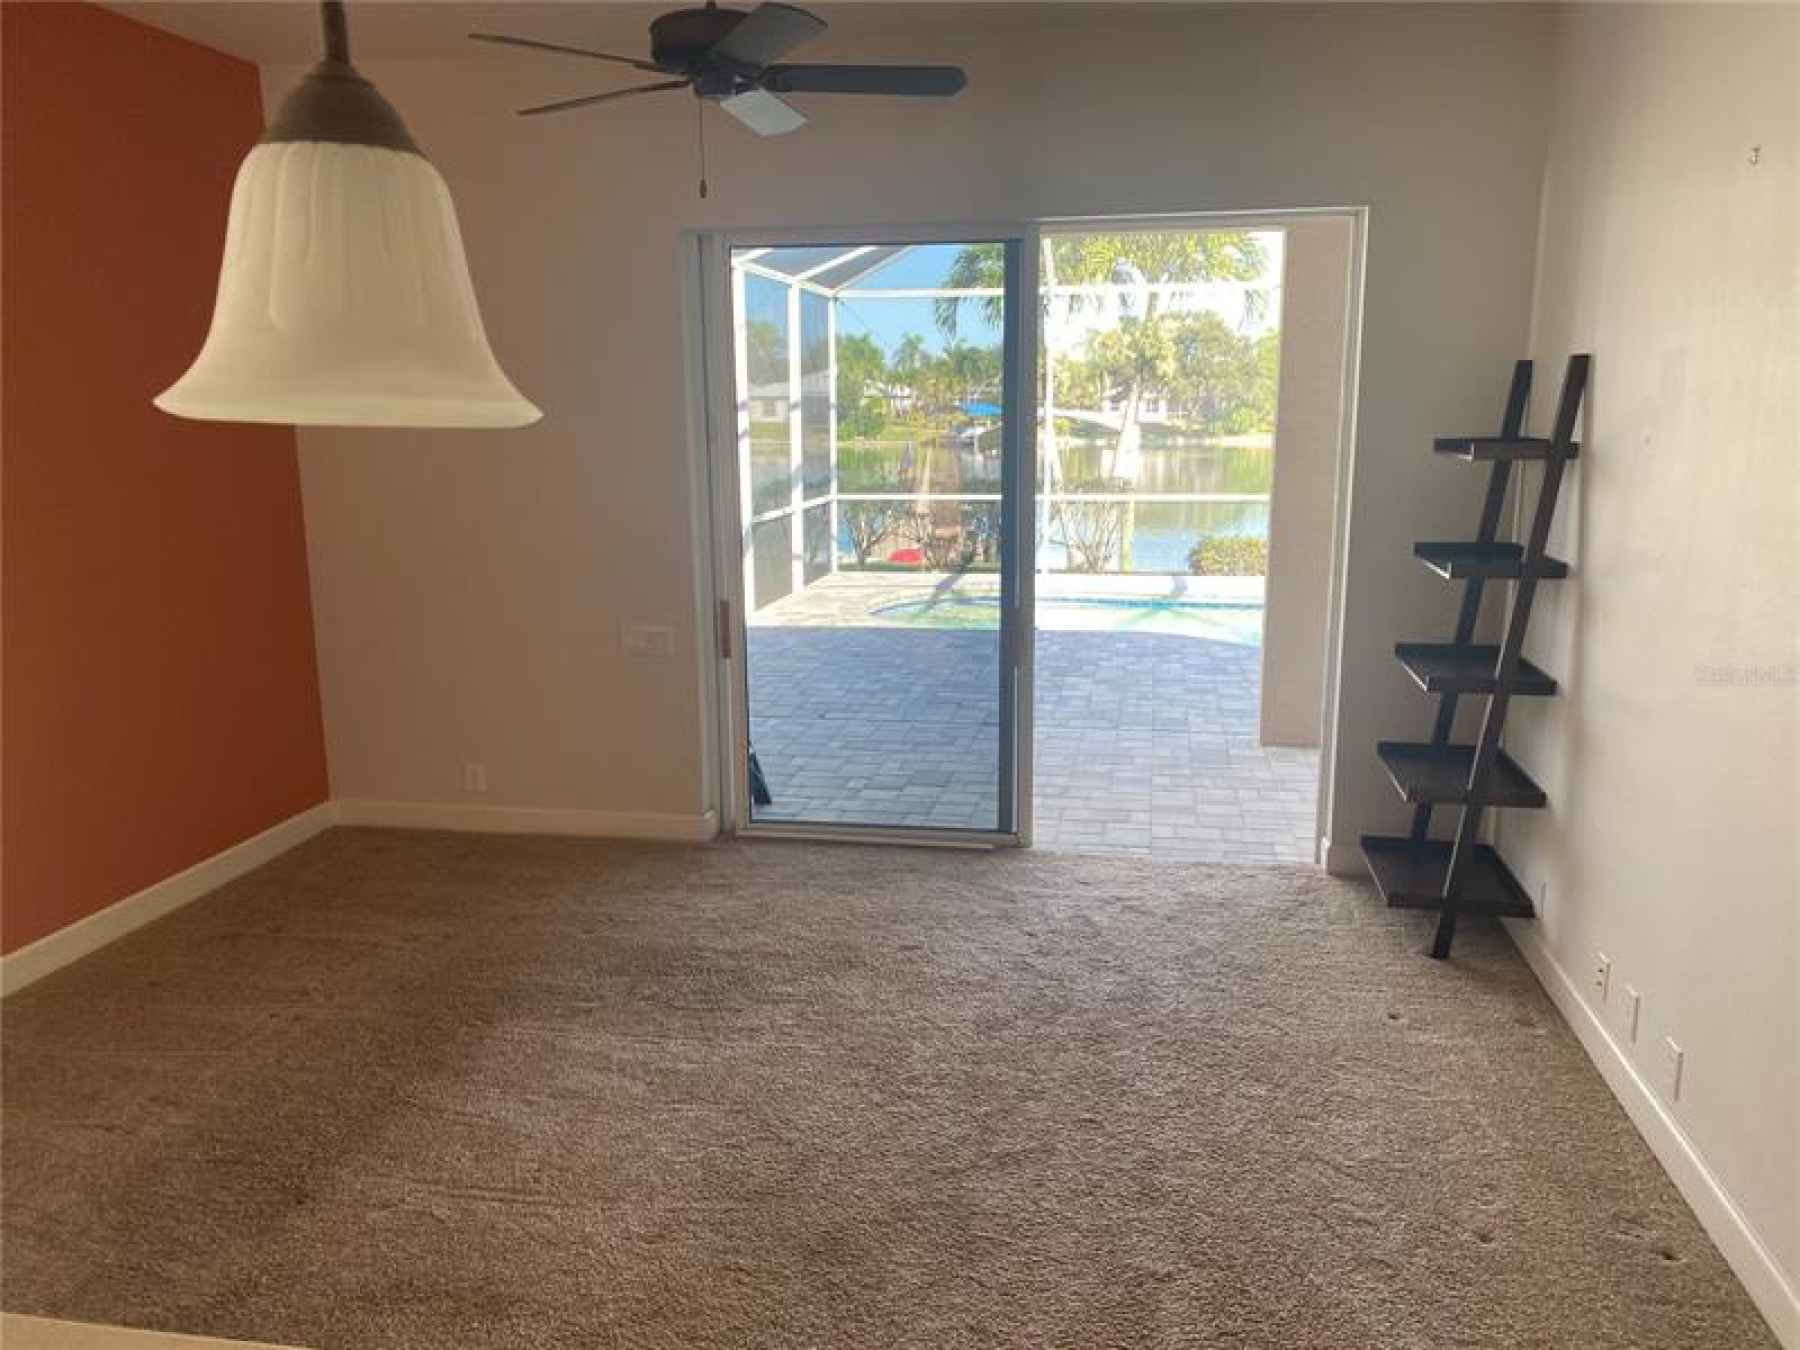 Great room leading directly to the pool!